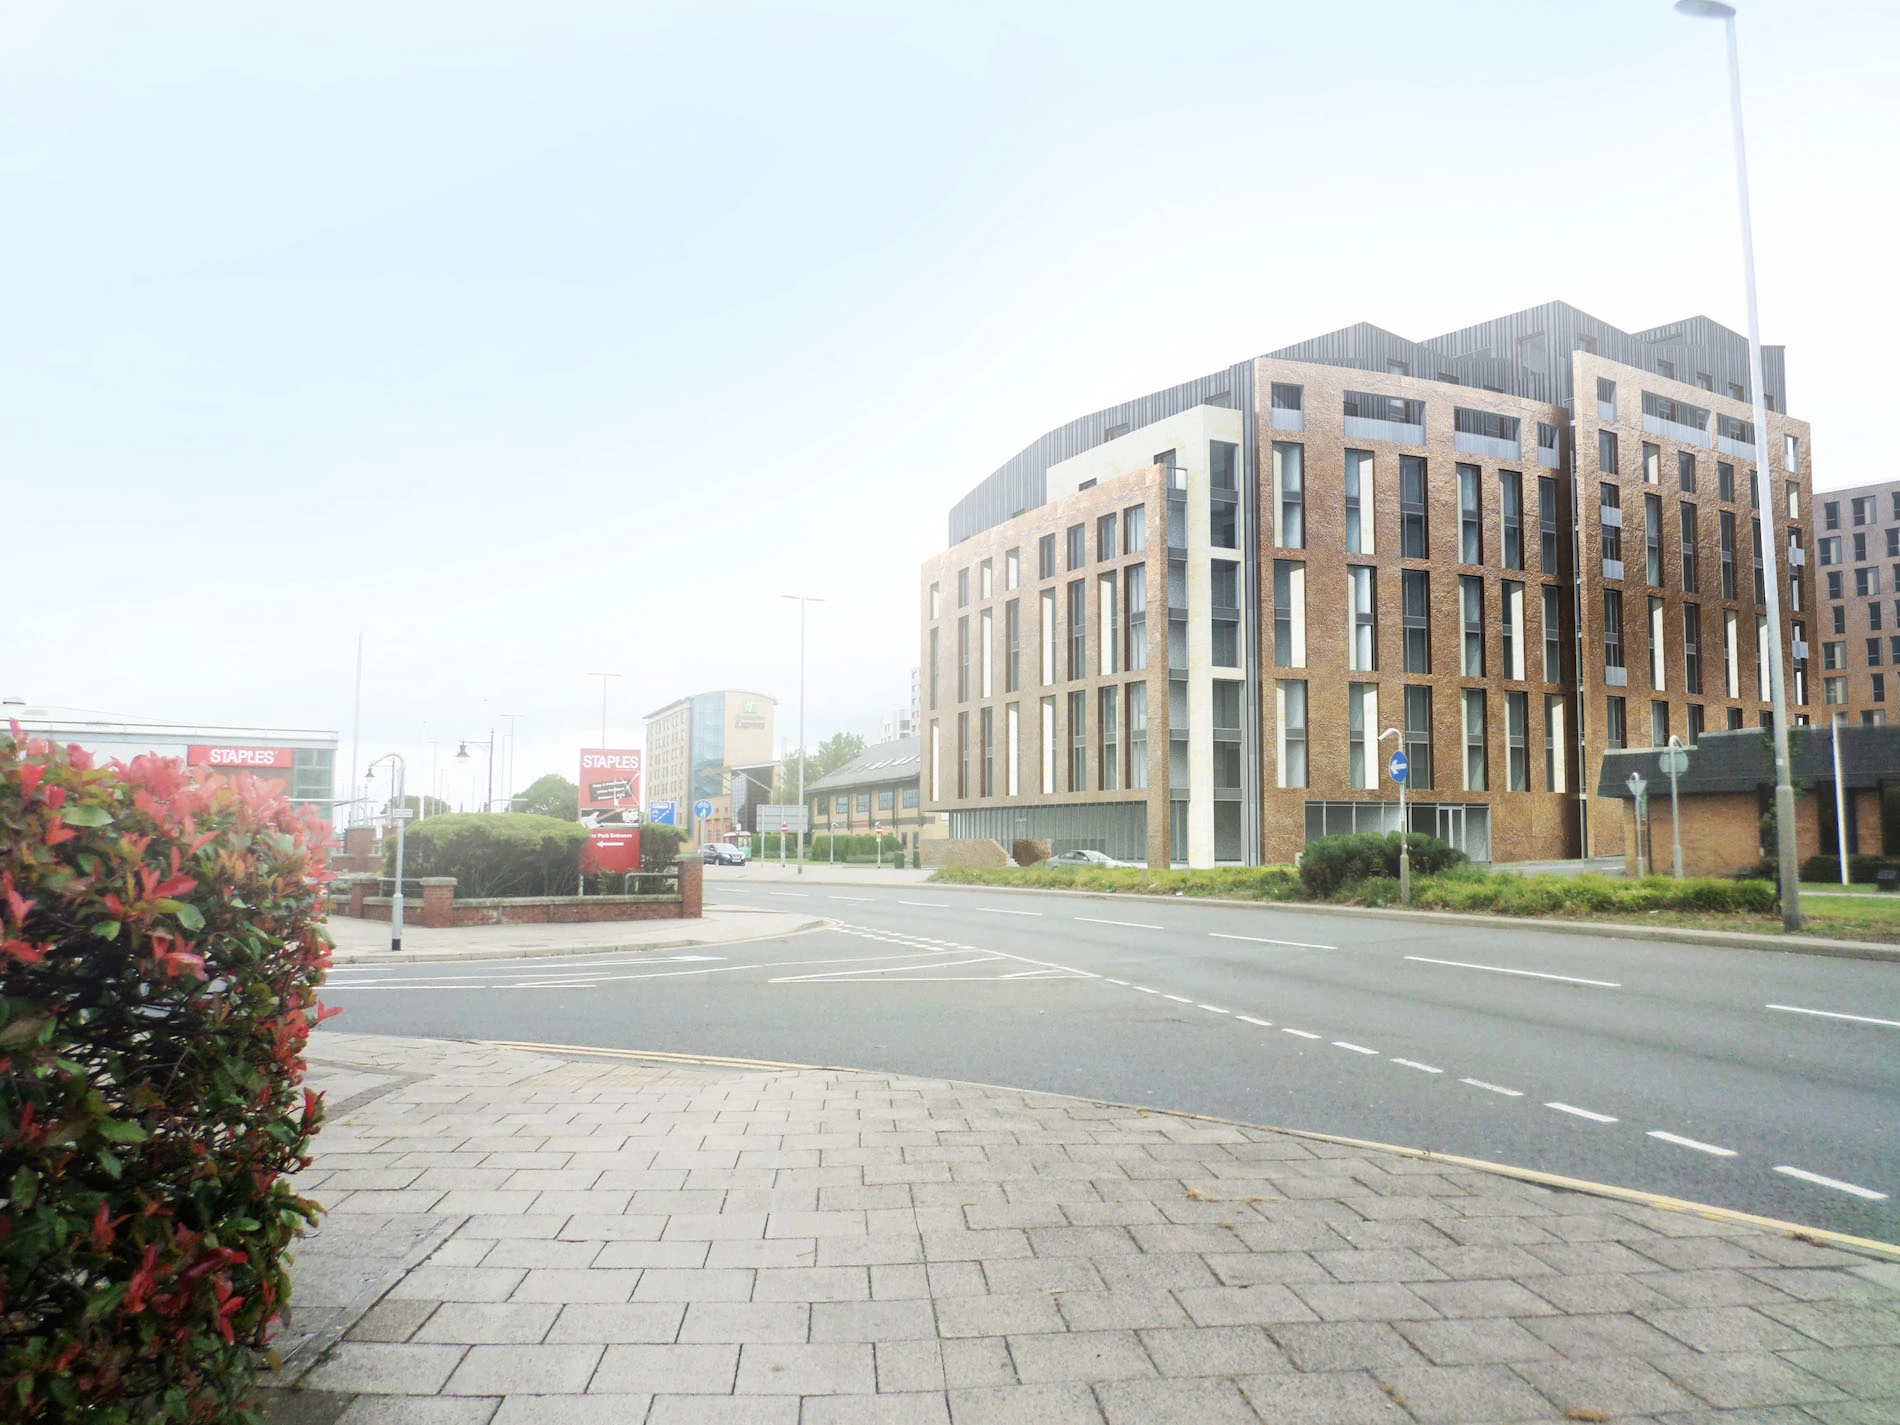  CGI of the new residential scheme on Kirkstall Road from DLA Architecture.